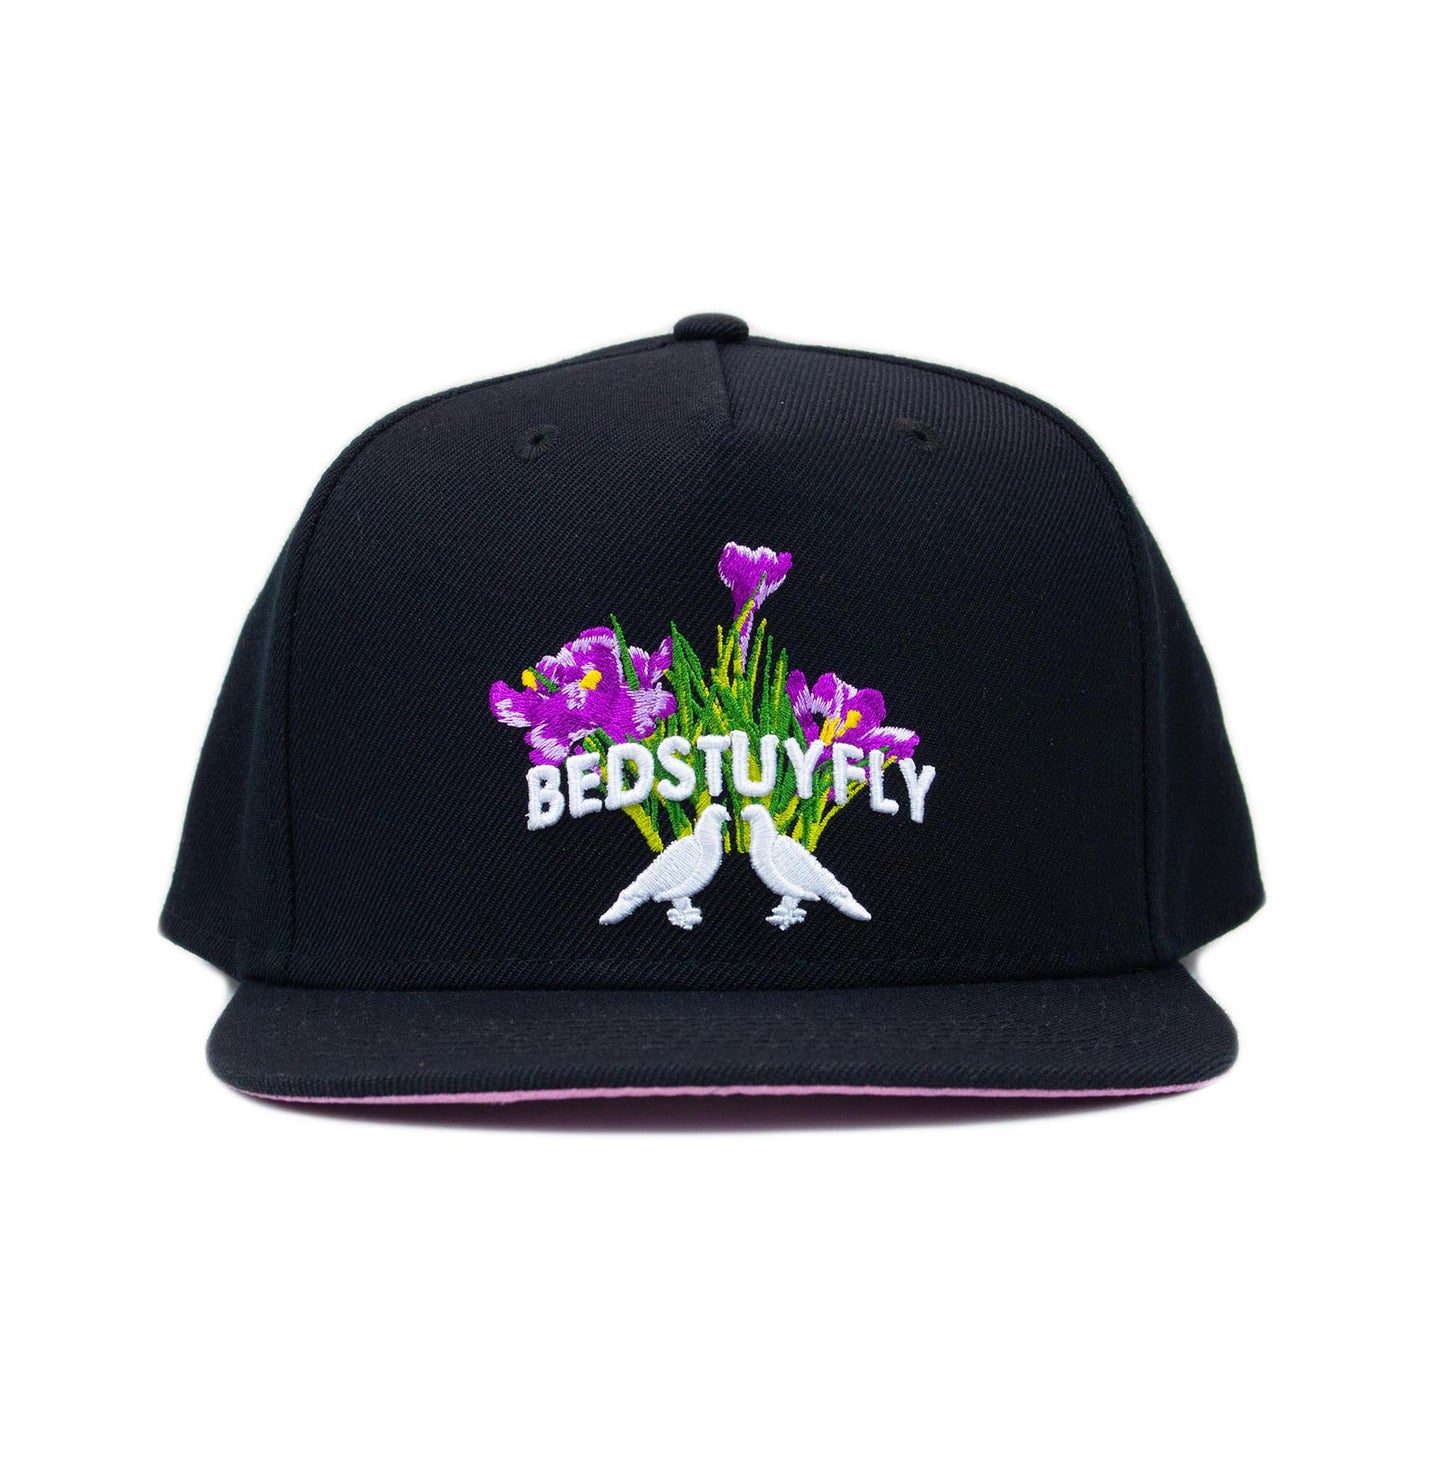 Give’m Flowers Cap - Bedstuyfly